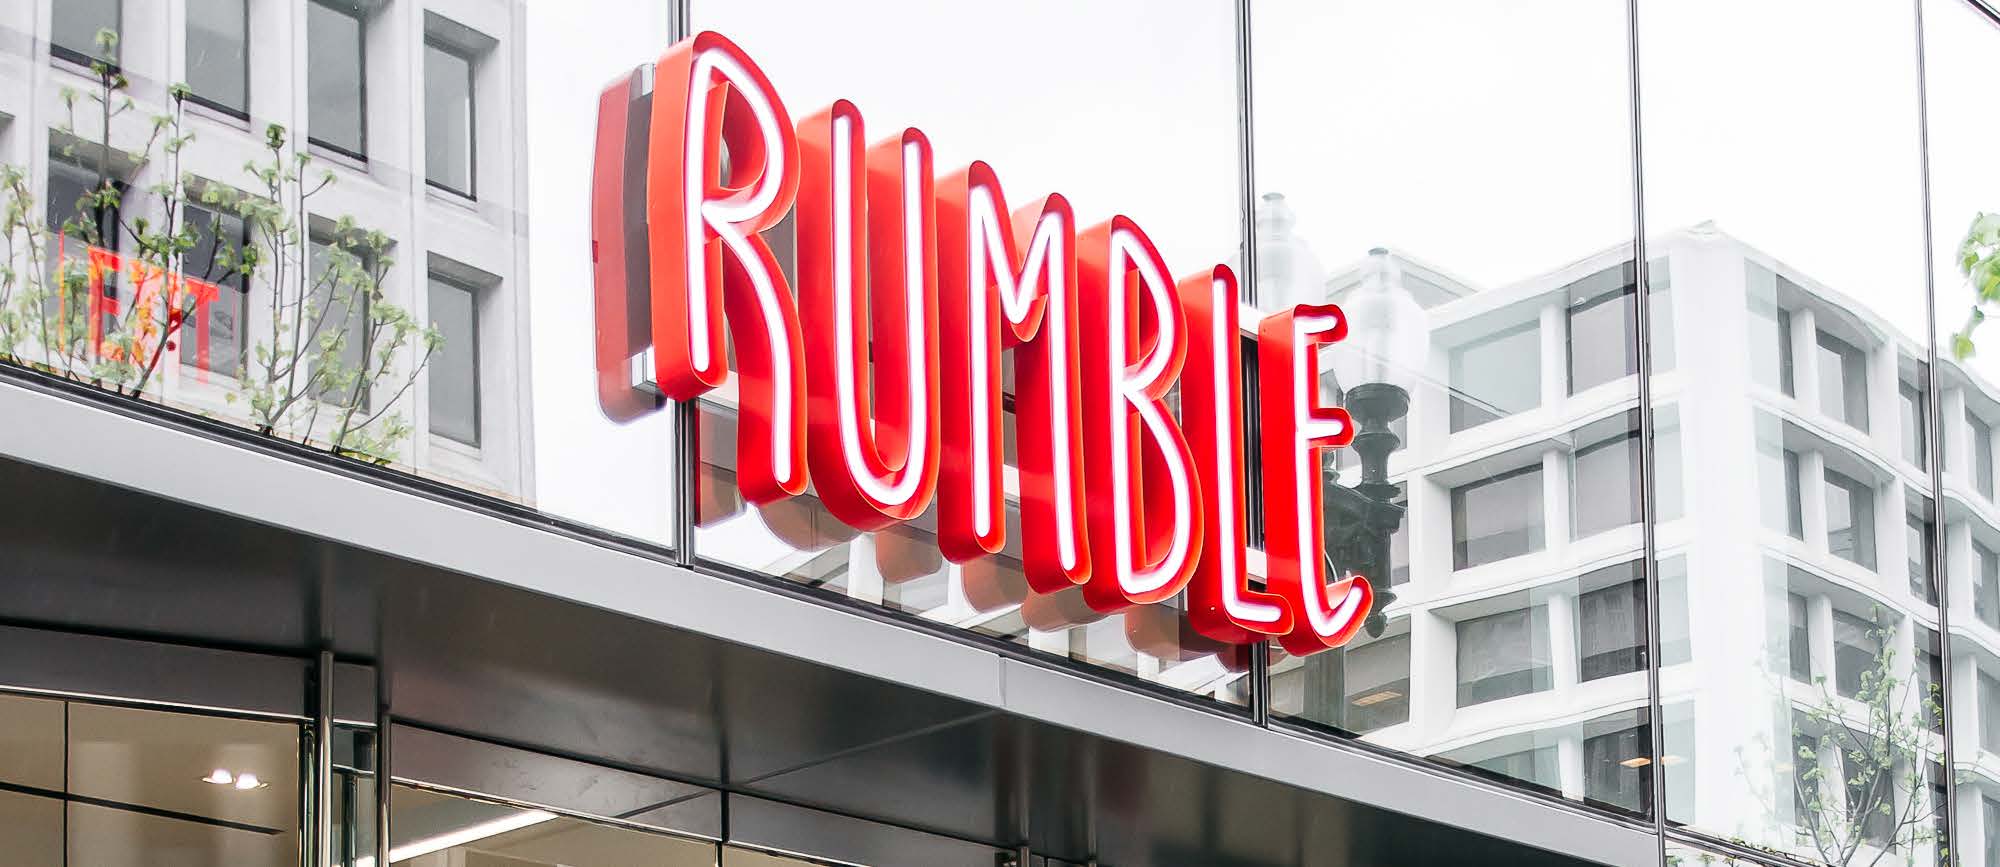 Rumble Boxing Exterior Signage - real_estate